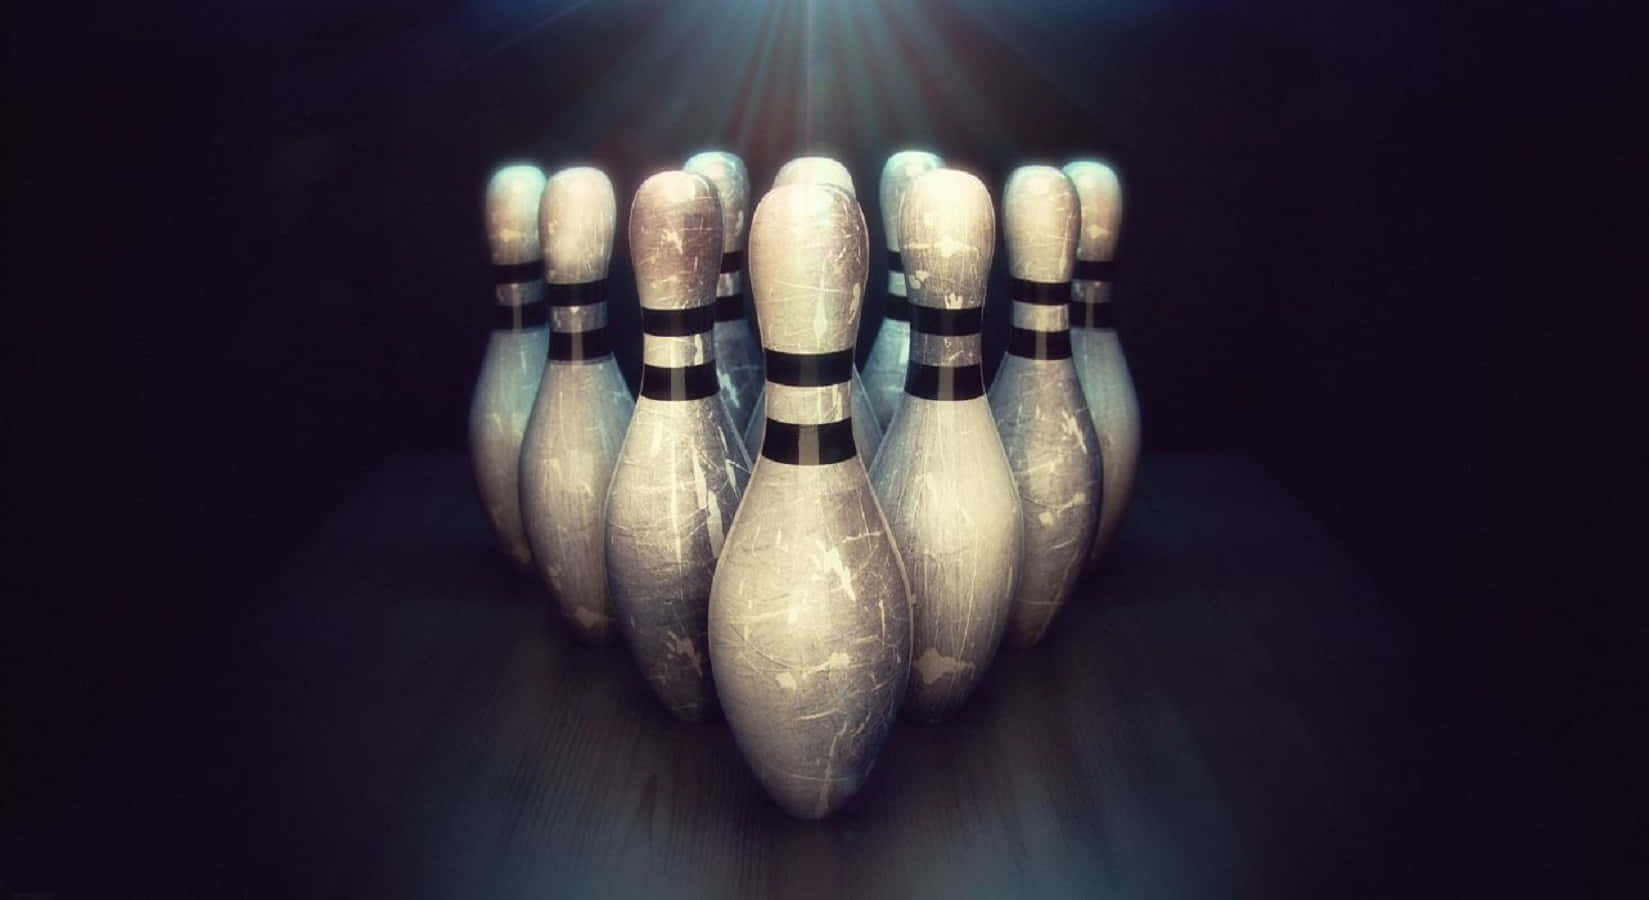 Bowling Pins In The Dark